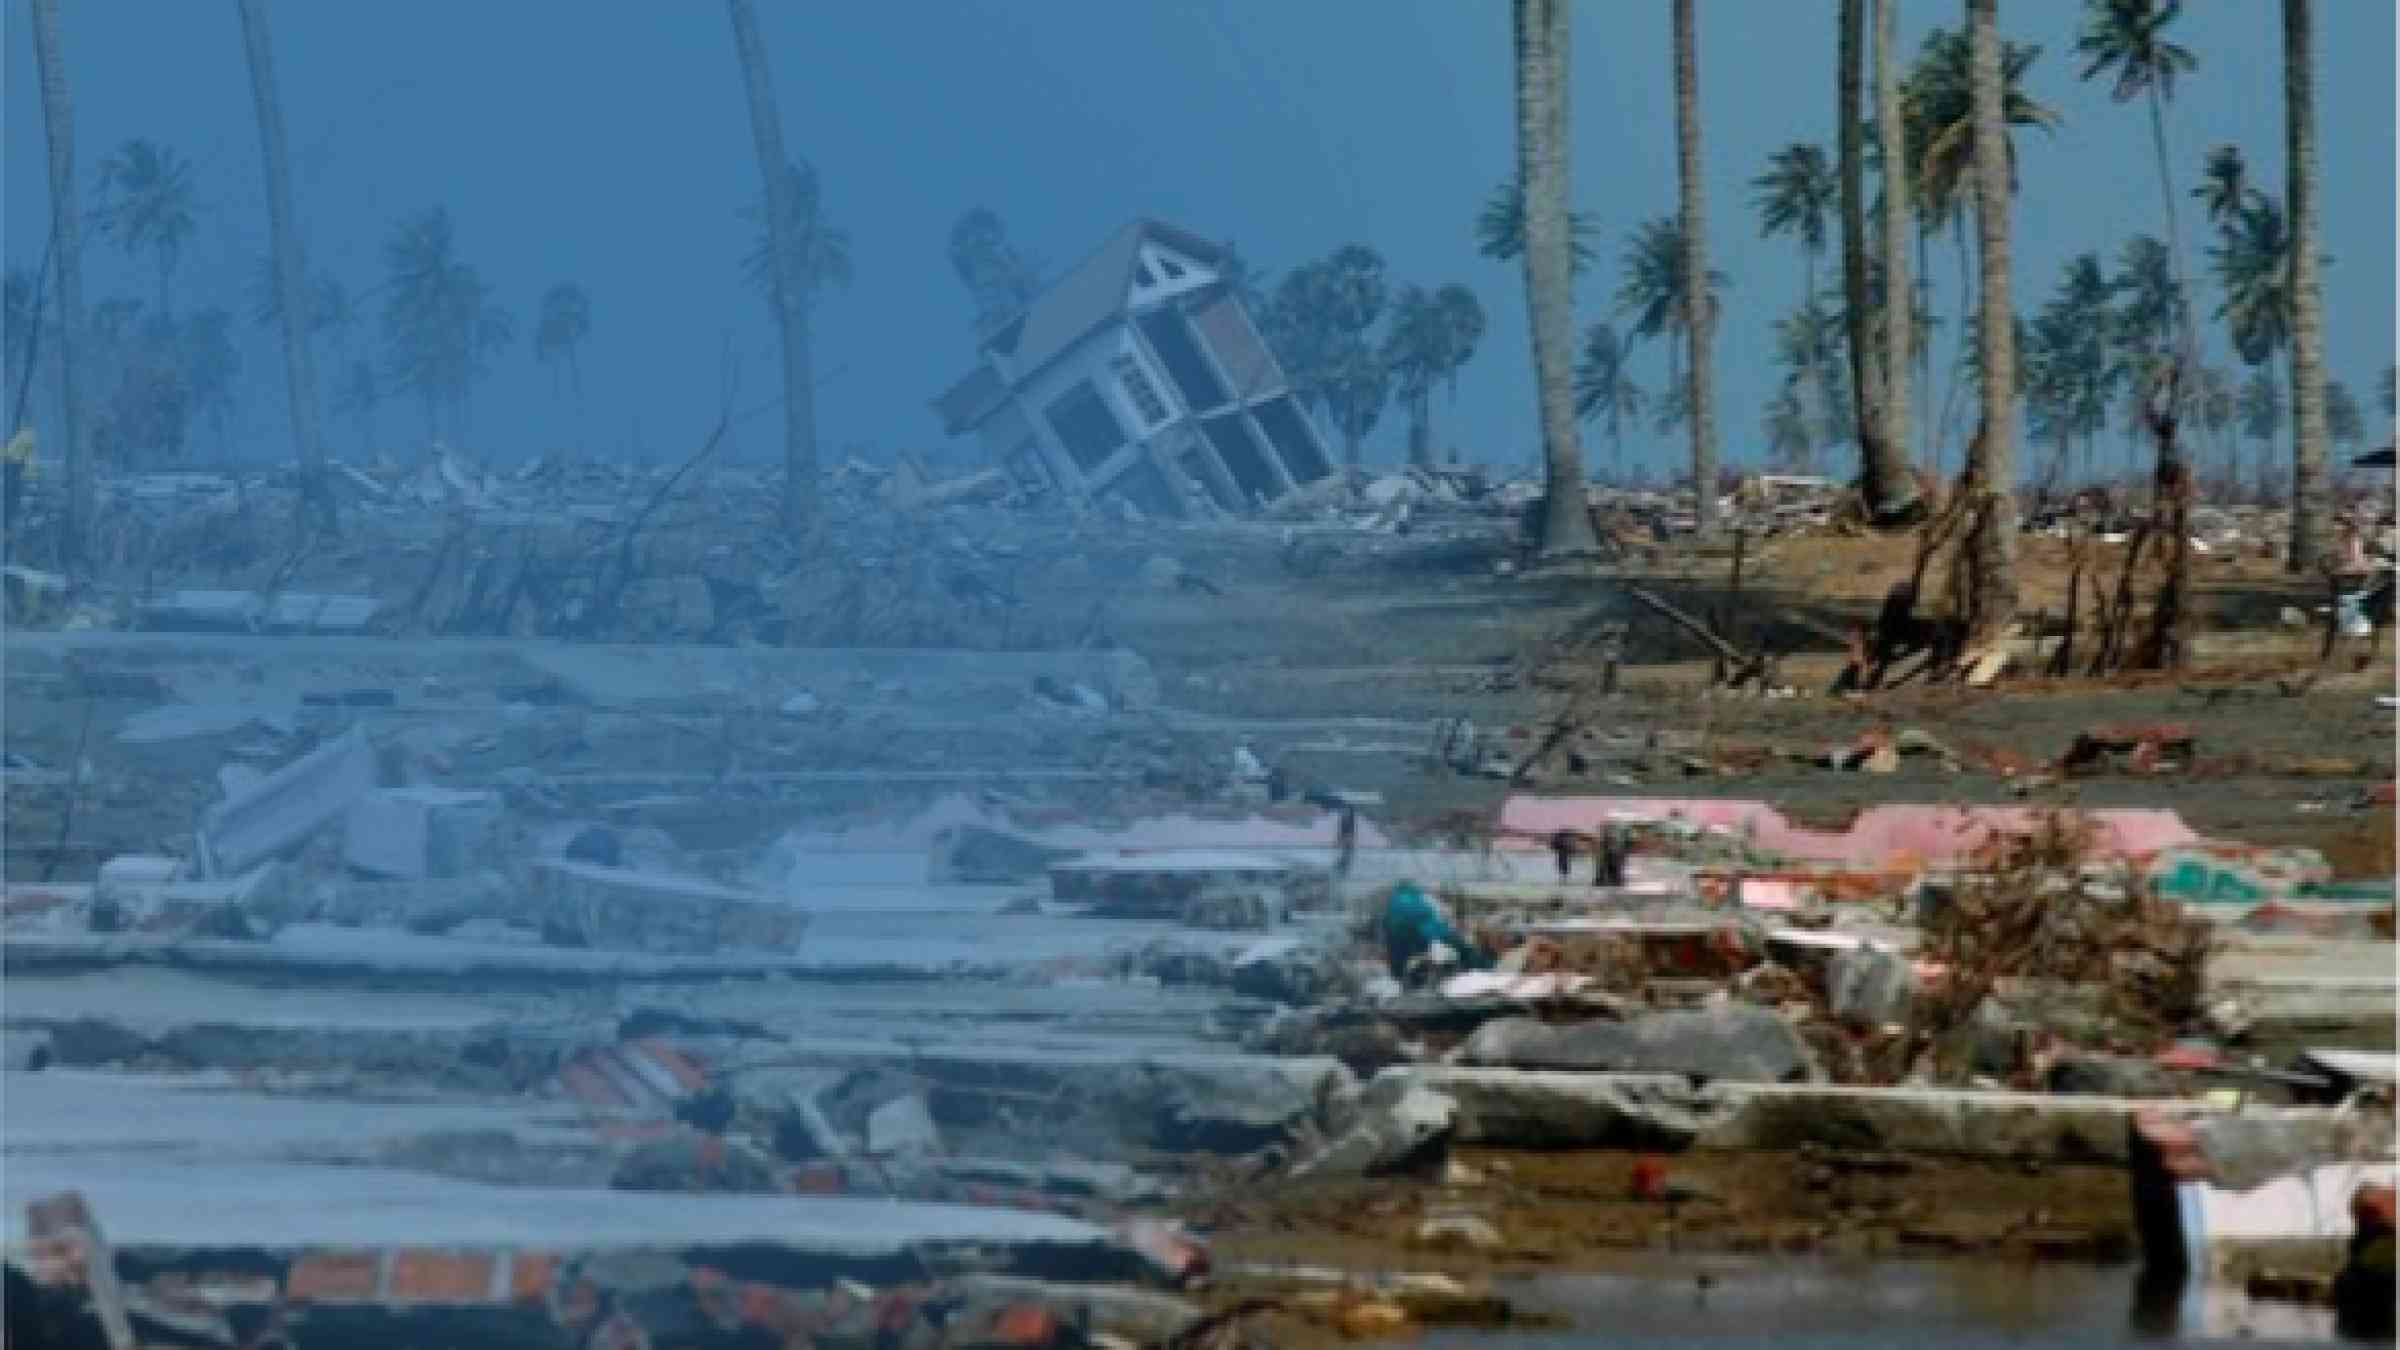 A photo of the Indian ocean tsunami and earthquake 2004 aftermath, showing flat waterlogged land with damaged buildings and a white house tipped over in the distance, palm trees stills tanding